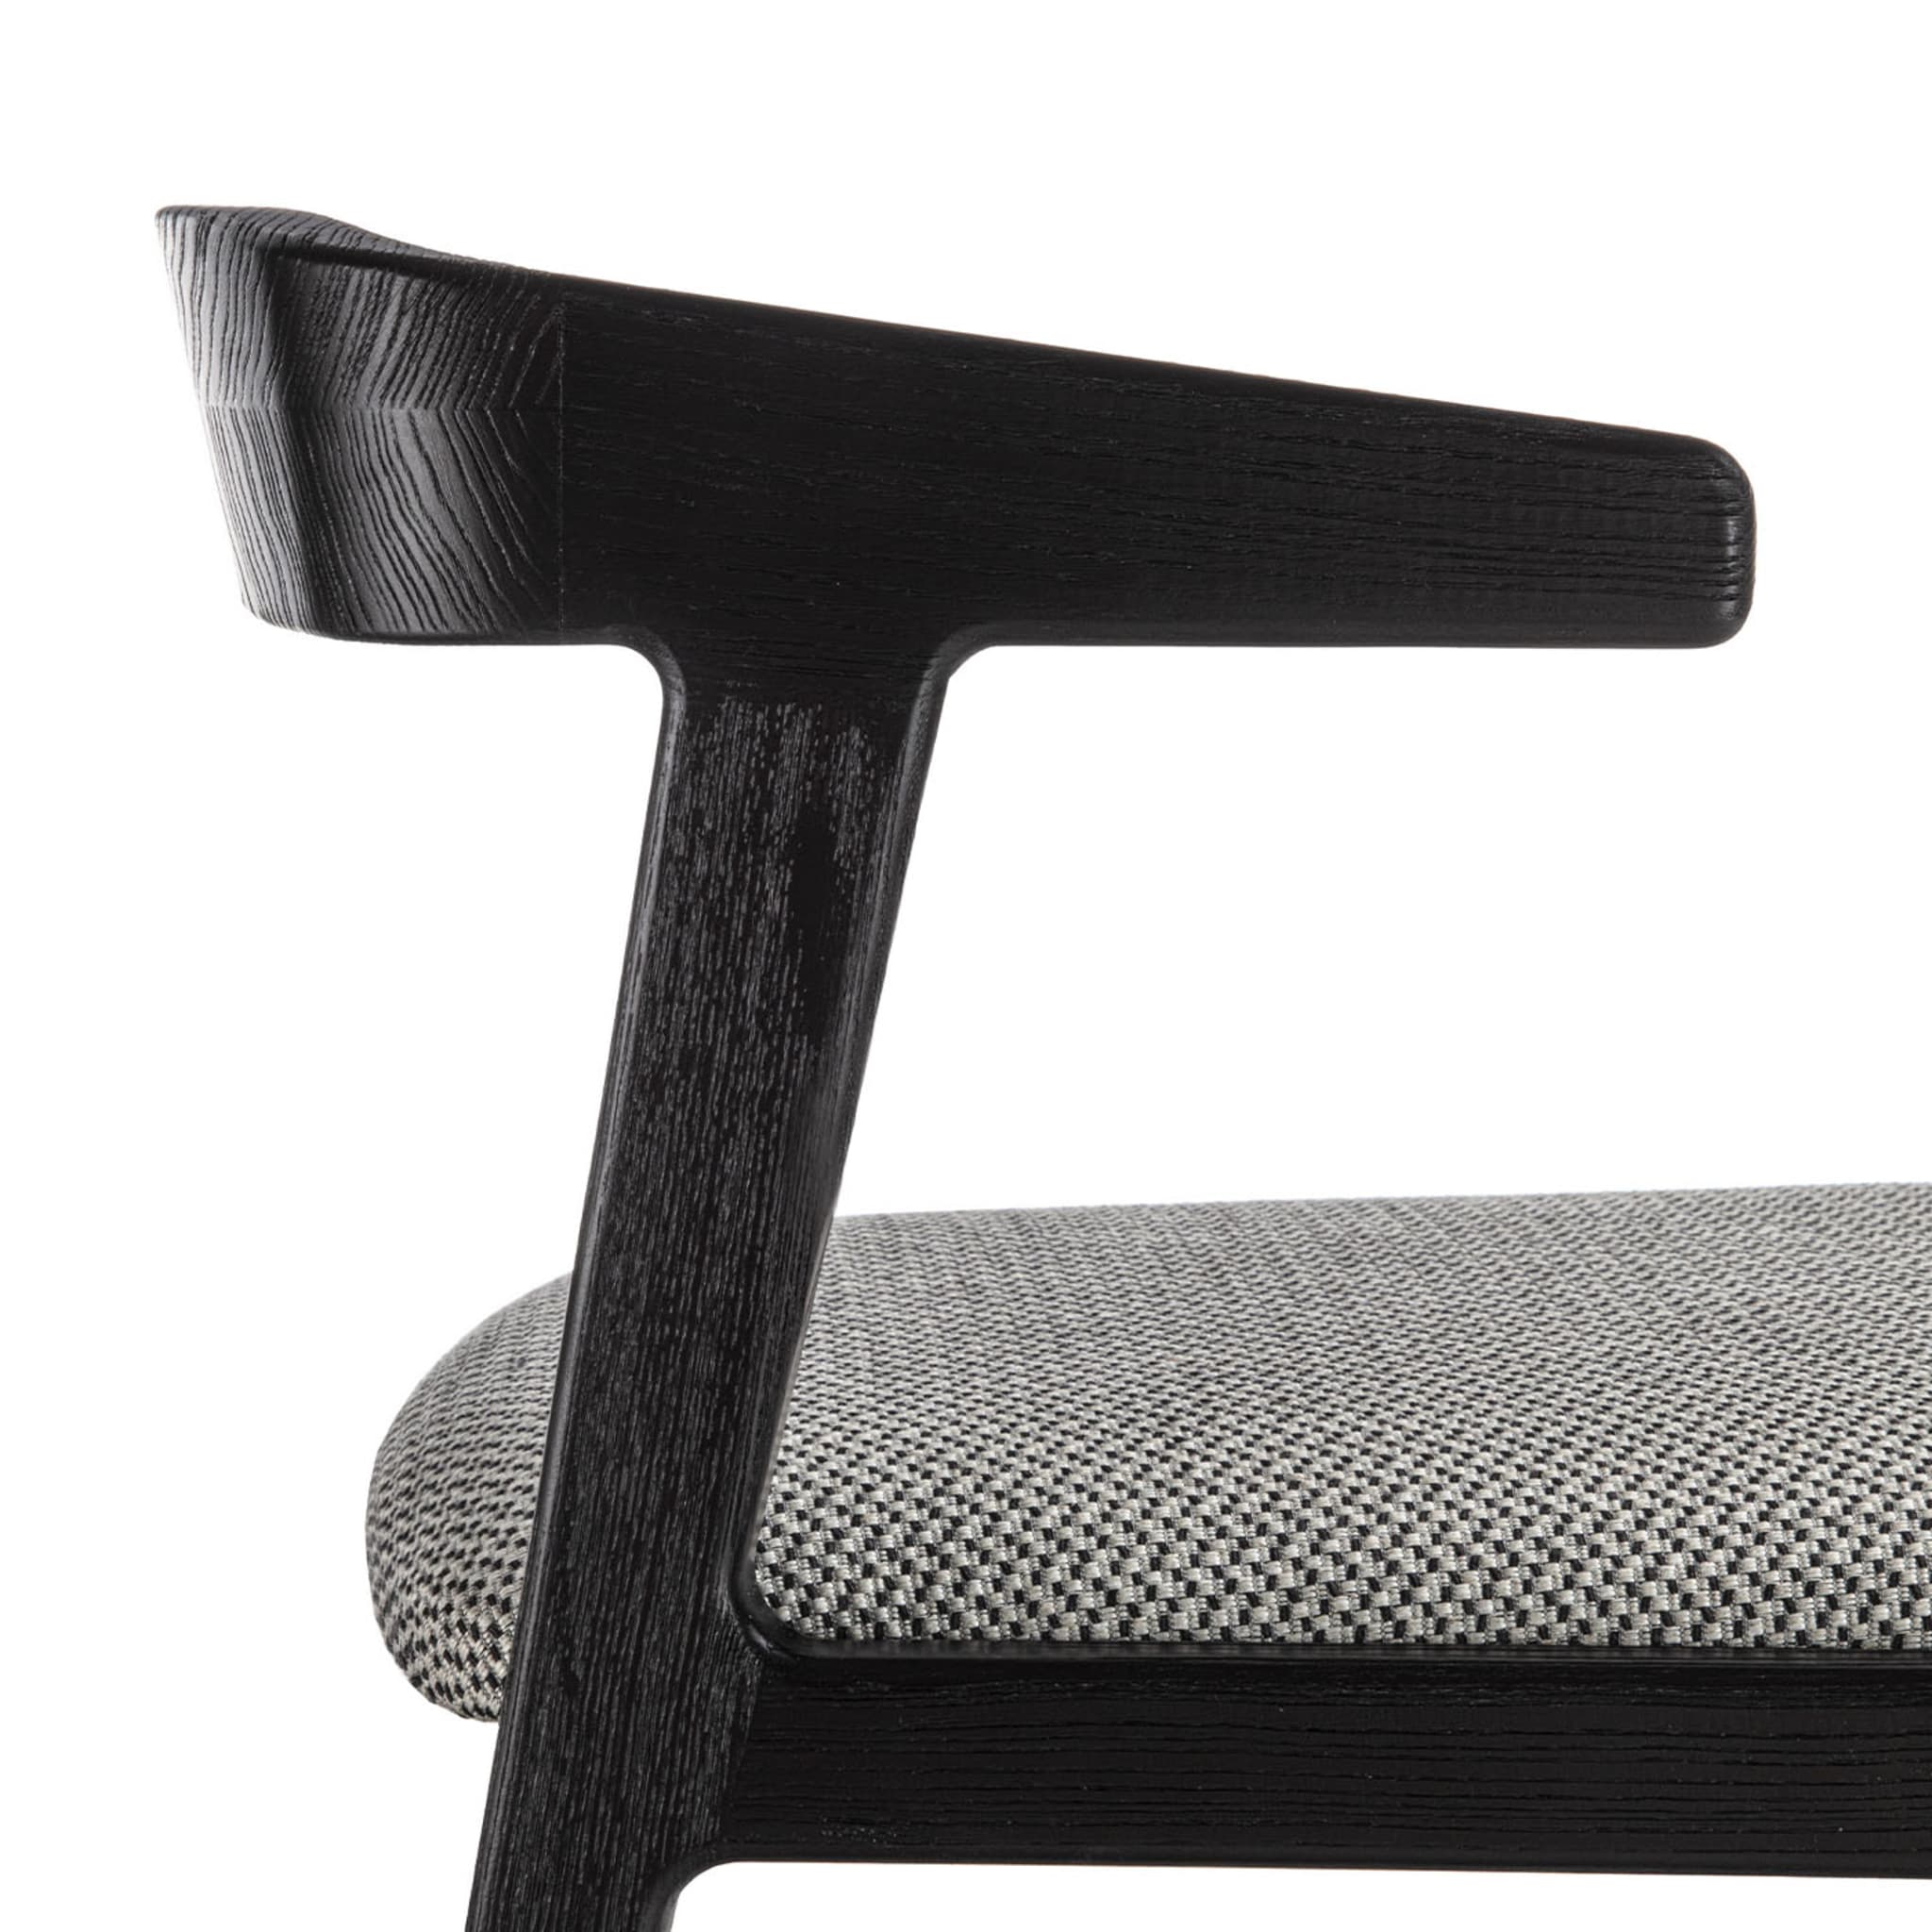 Aida Black Chair with Arms - Alternative view 2